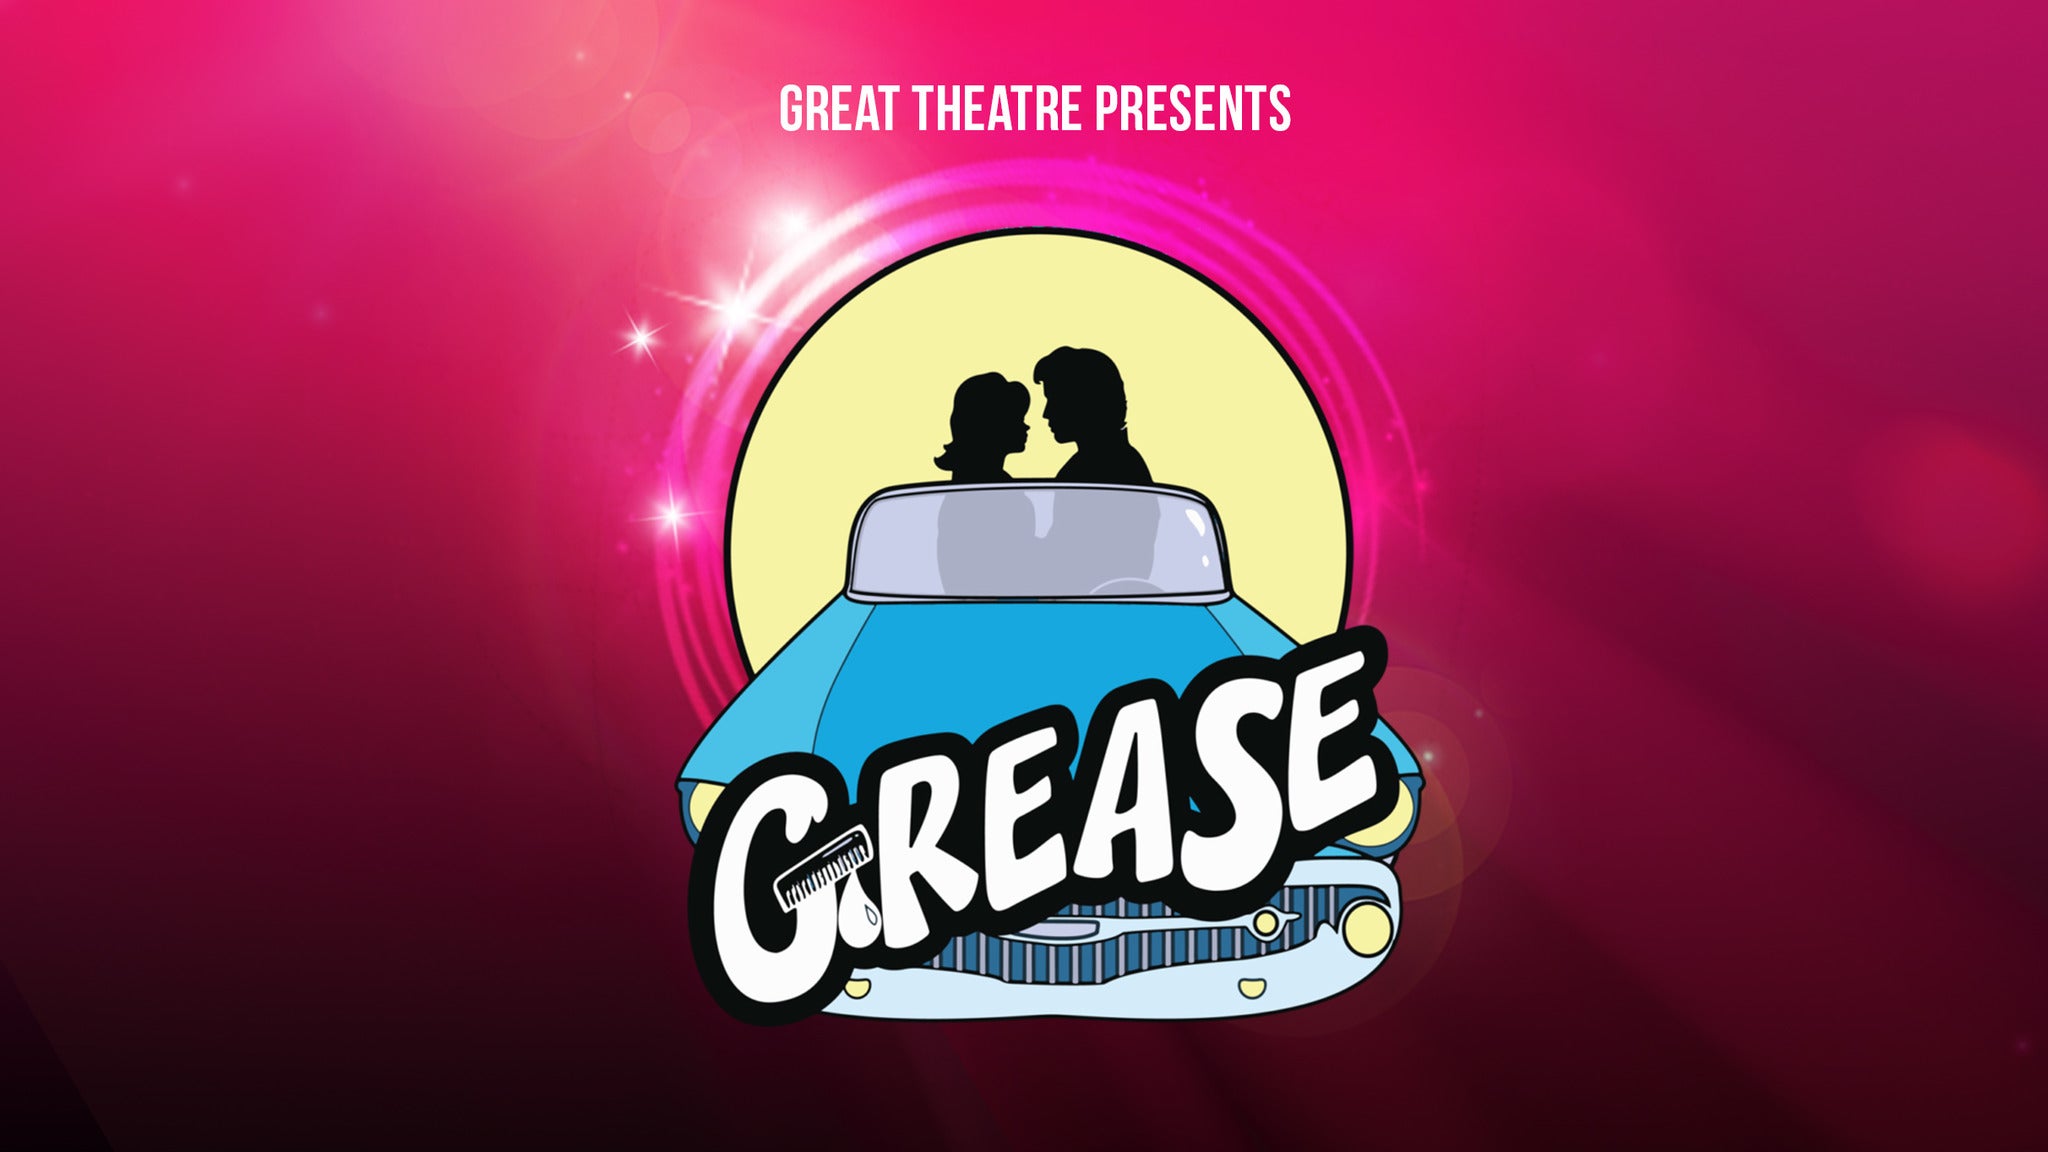 GREAT Theatre Presents: Grease